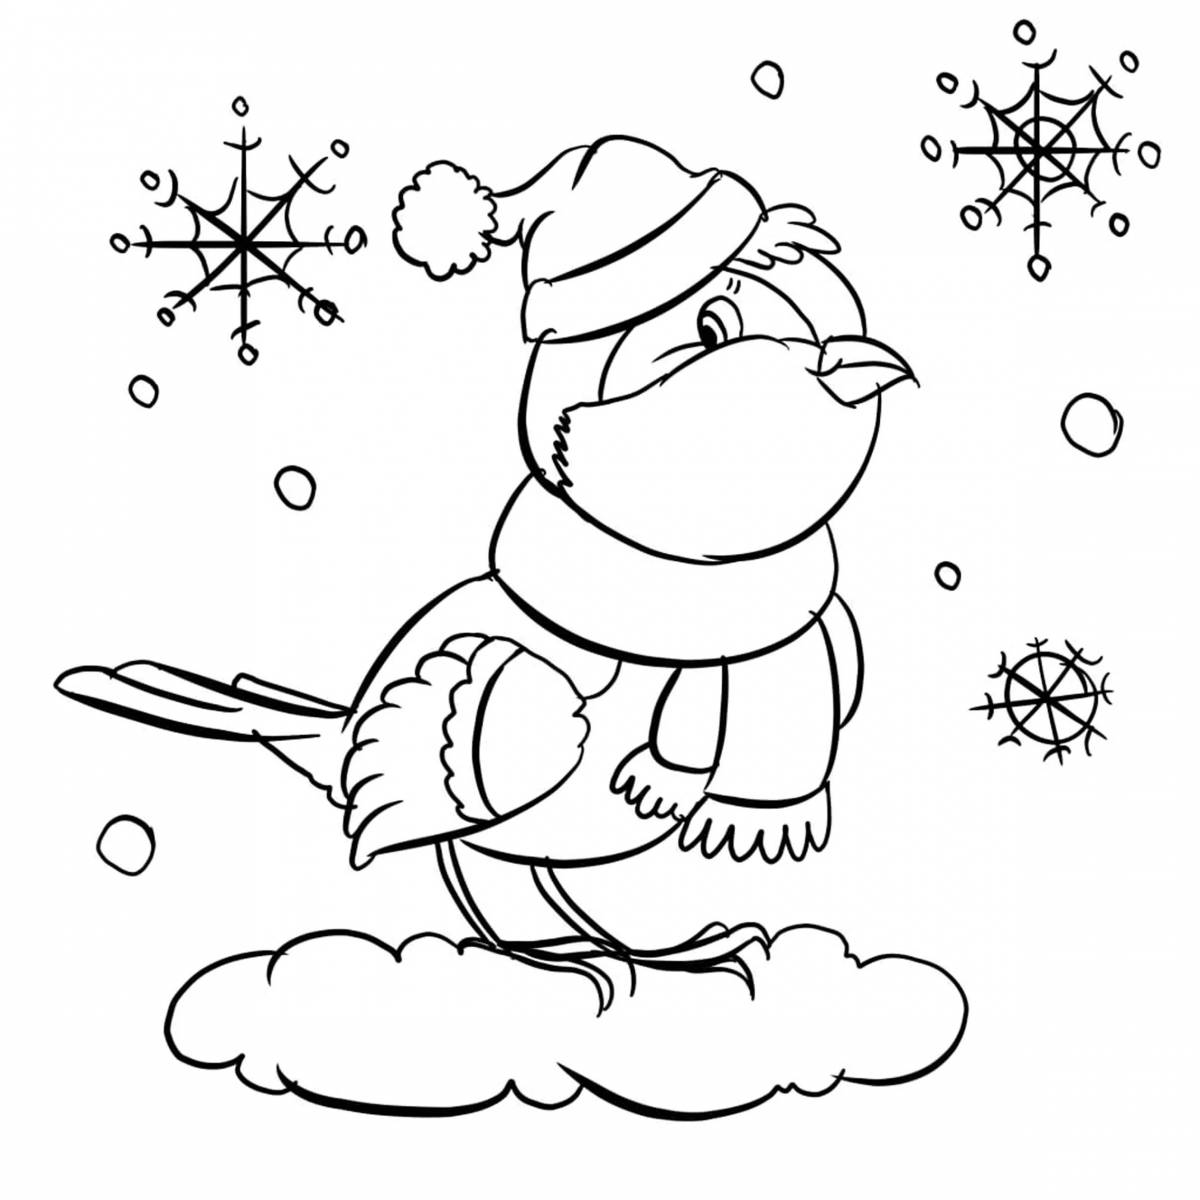 Adorable winter birds coloring book for 3-4 year olds